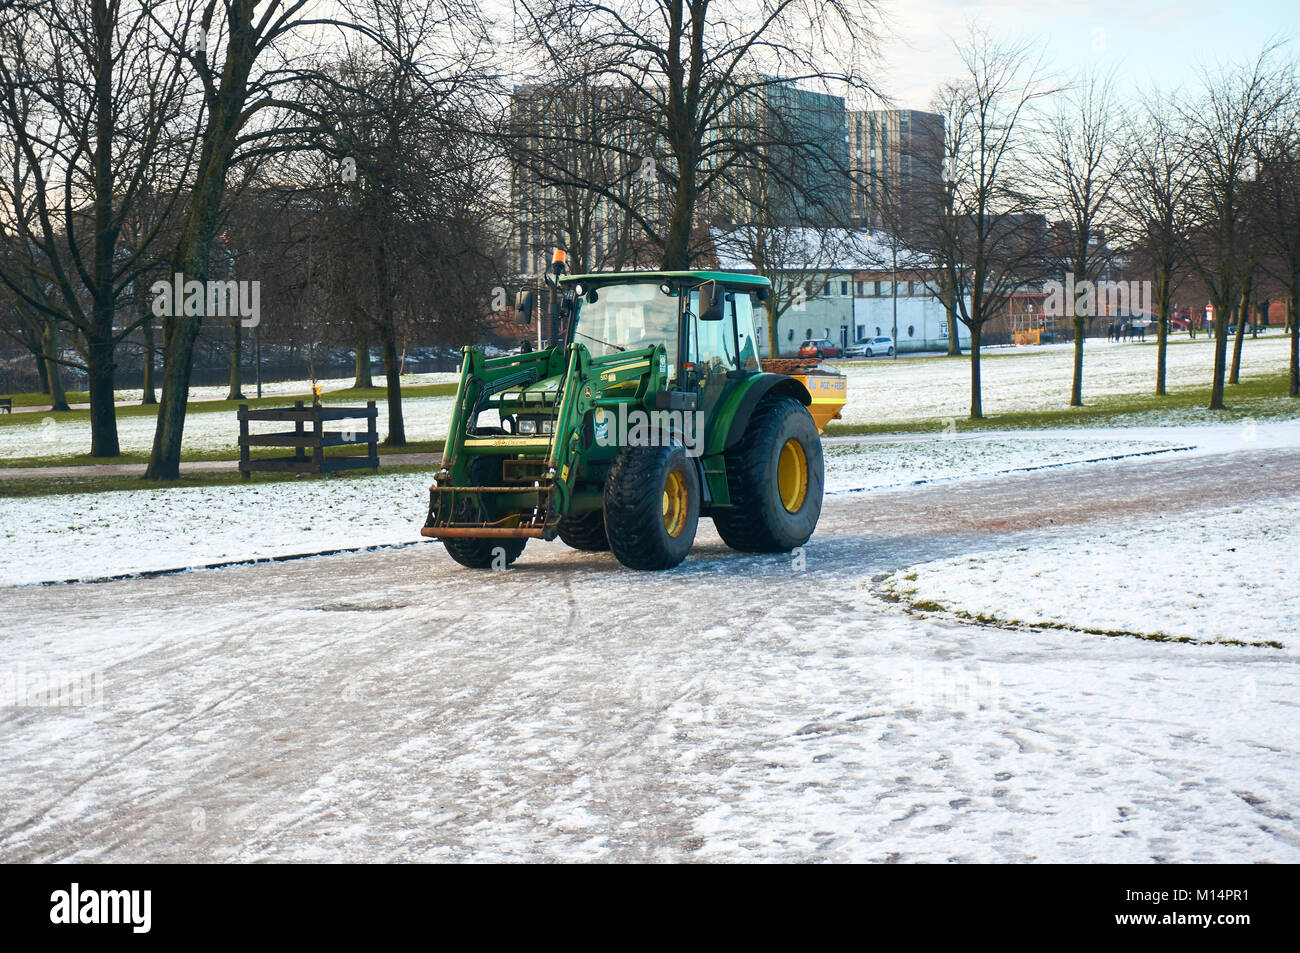 Tractor gritting the pathways in the Glasgow Green Park, Glasgow, Scotland. Stock Photo